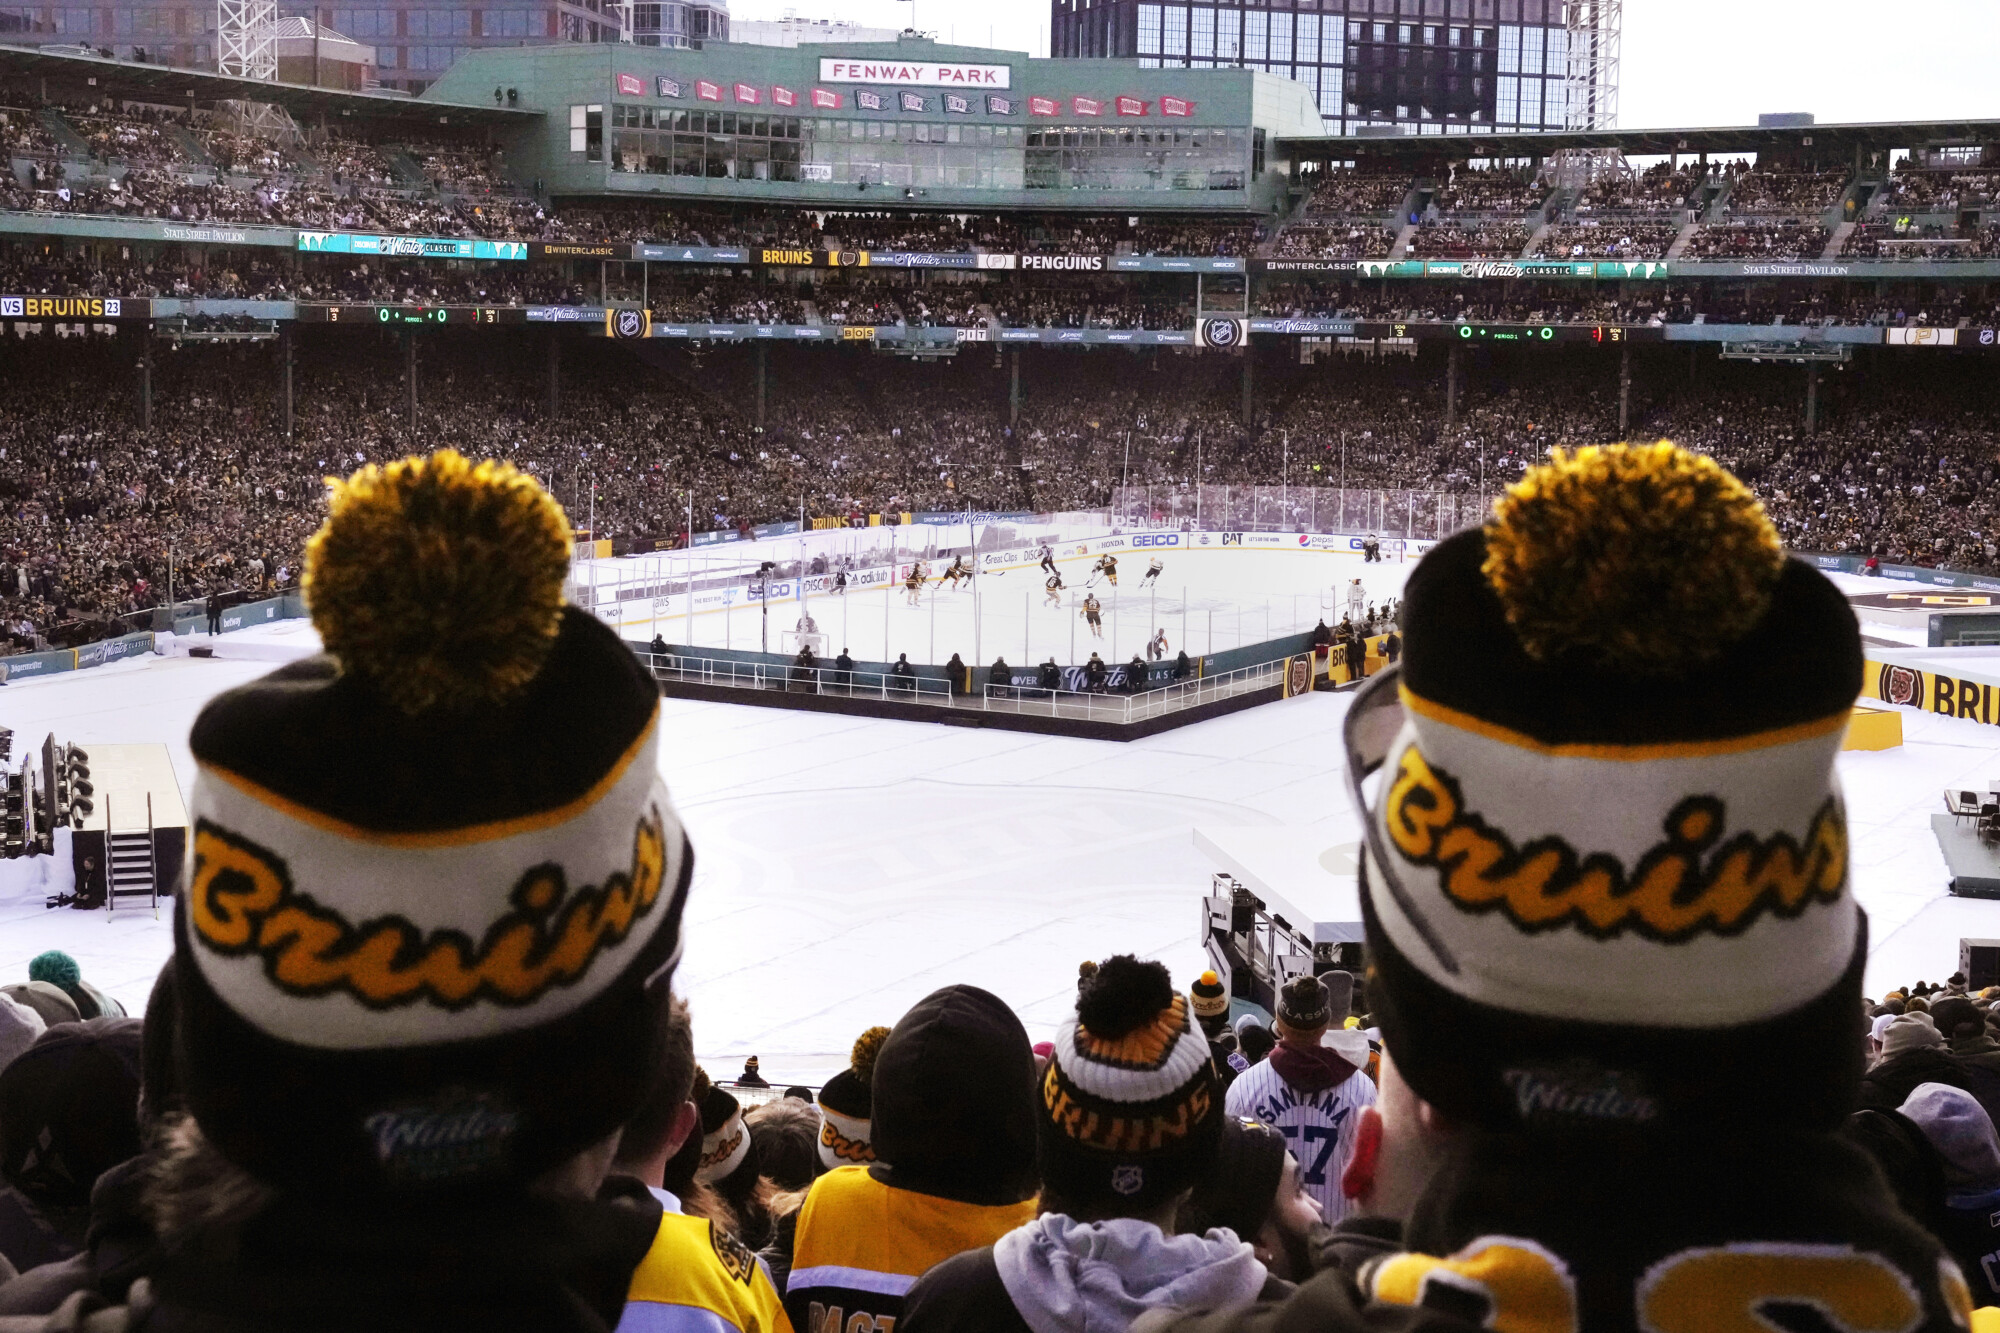 2014 Winter Classic at Michigan Stadium named NHL 'Event of the Decade' 